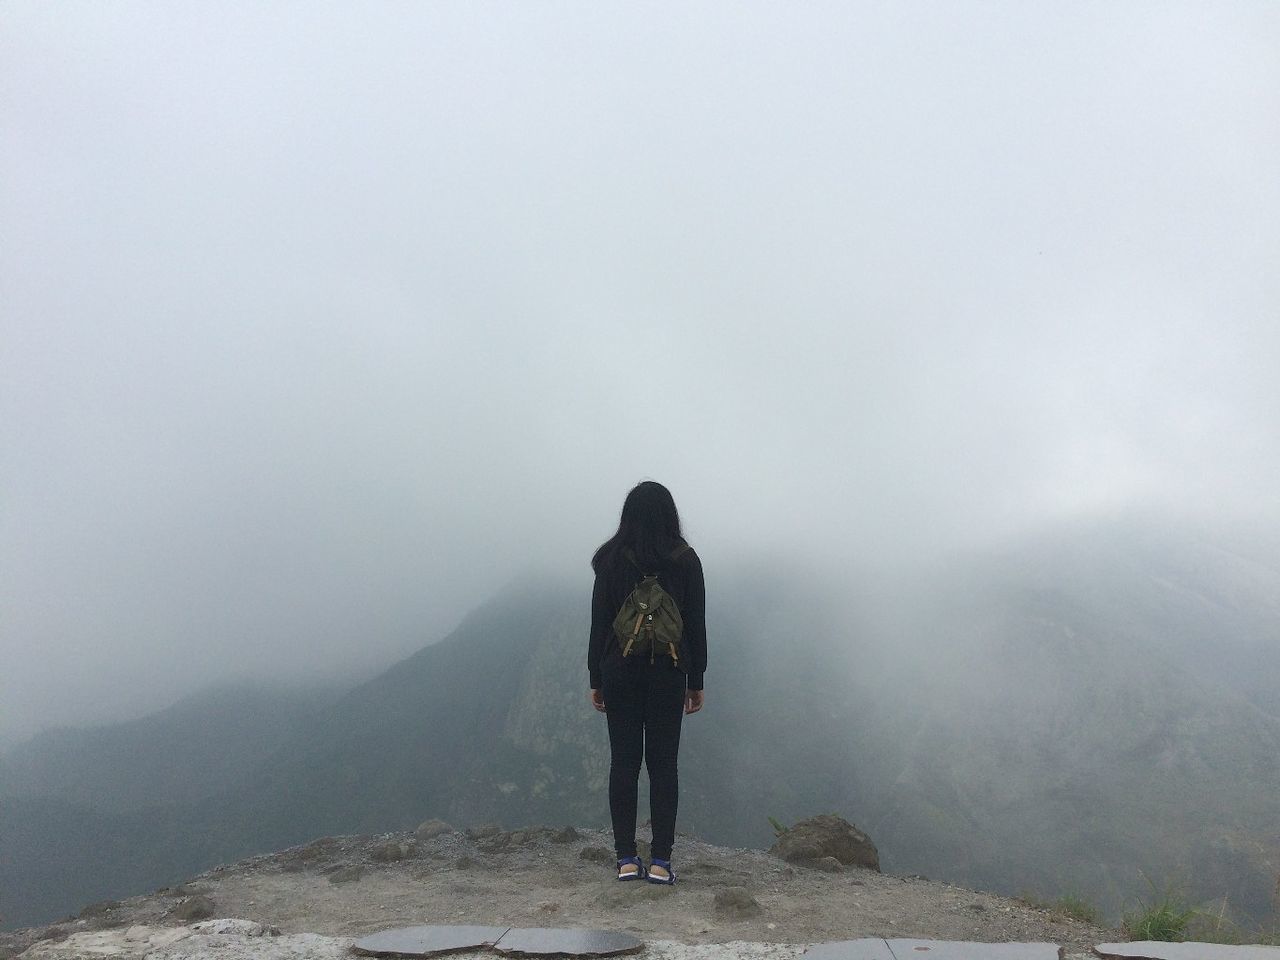 REAR VIEW OF WOMAN WALKING ON MOUNTAIN AGAINST SKY DURING FOGGY WEATHER